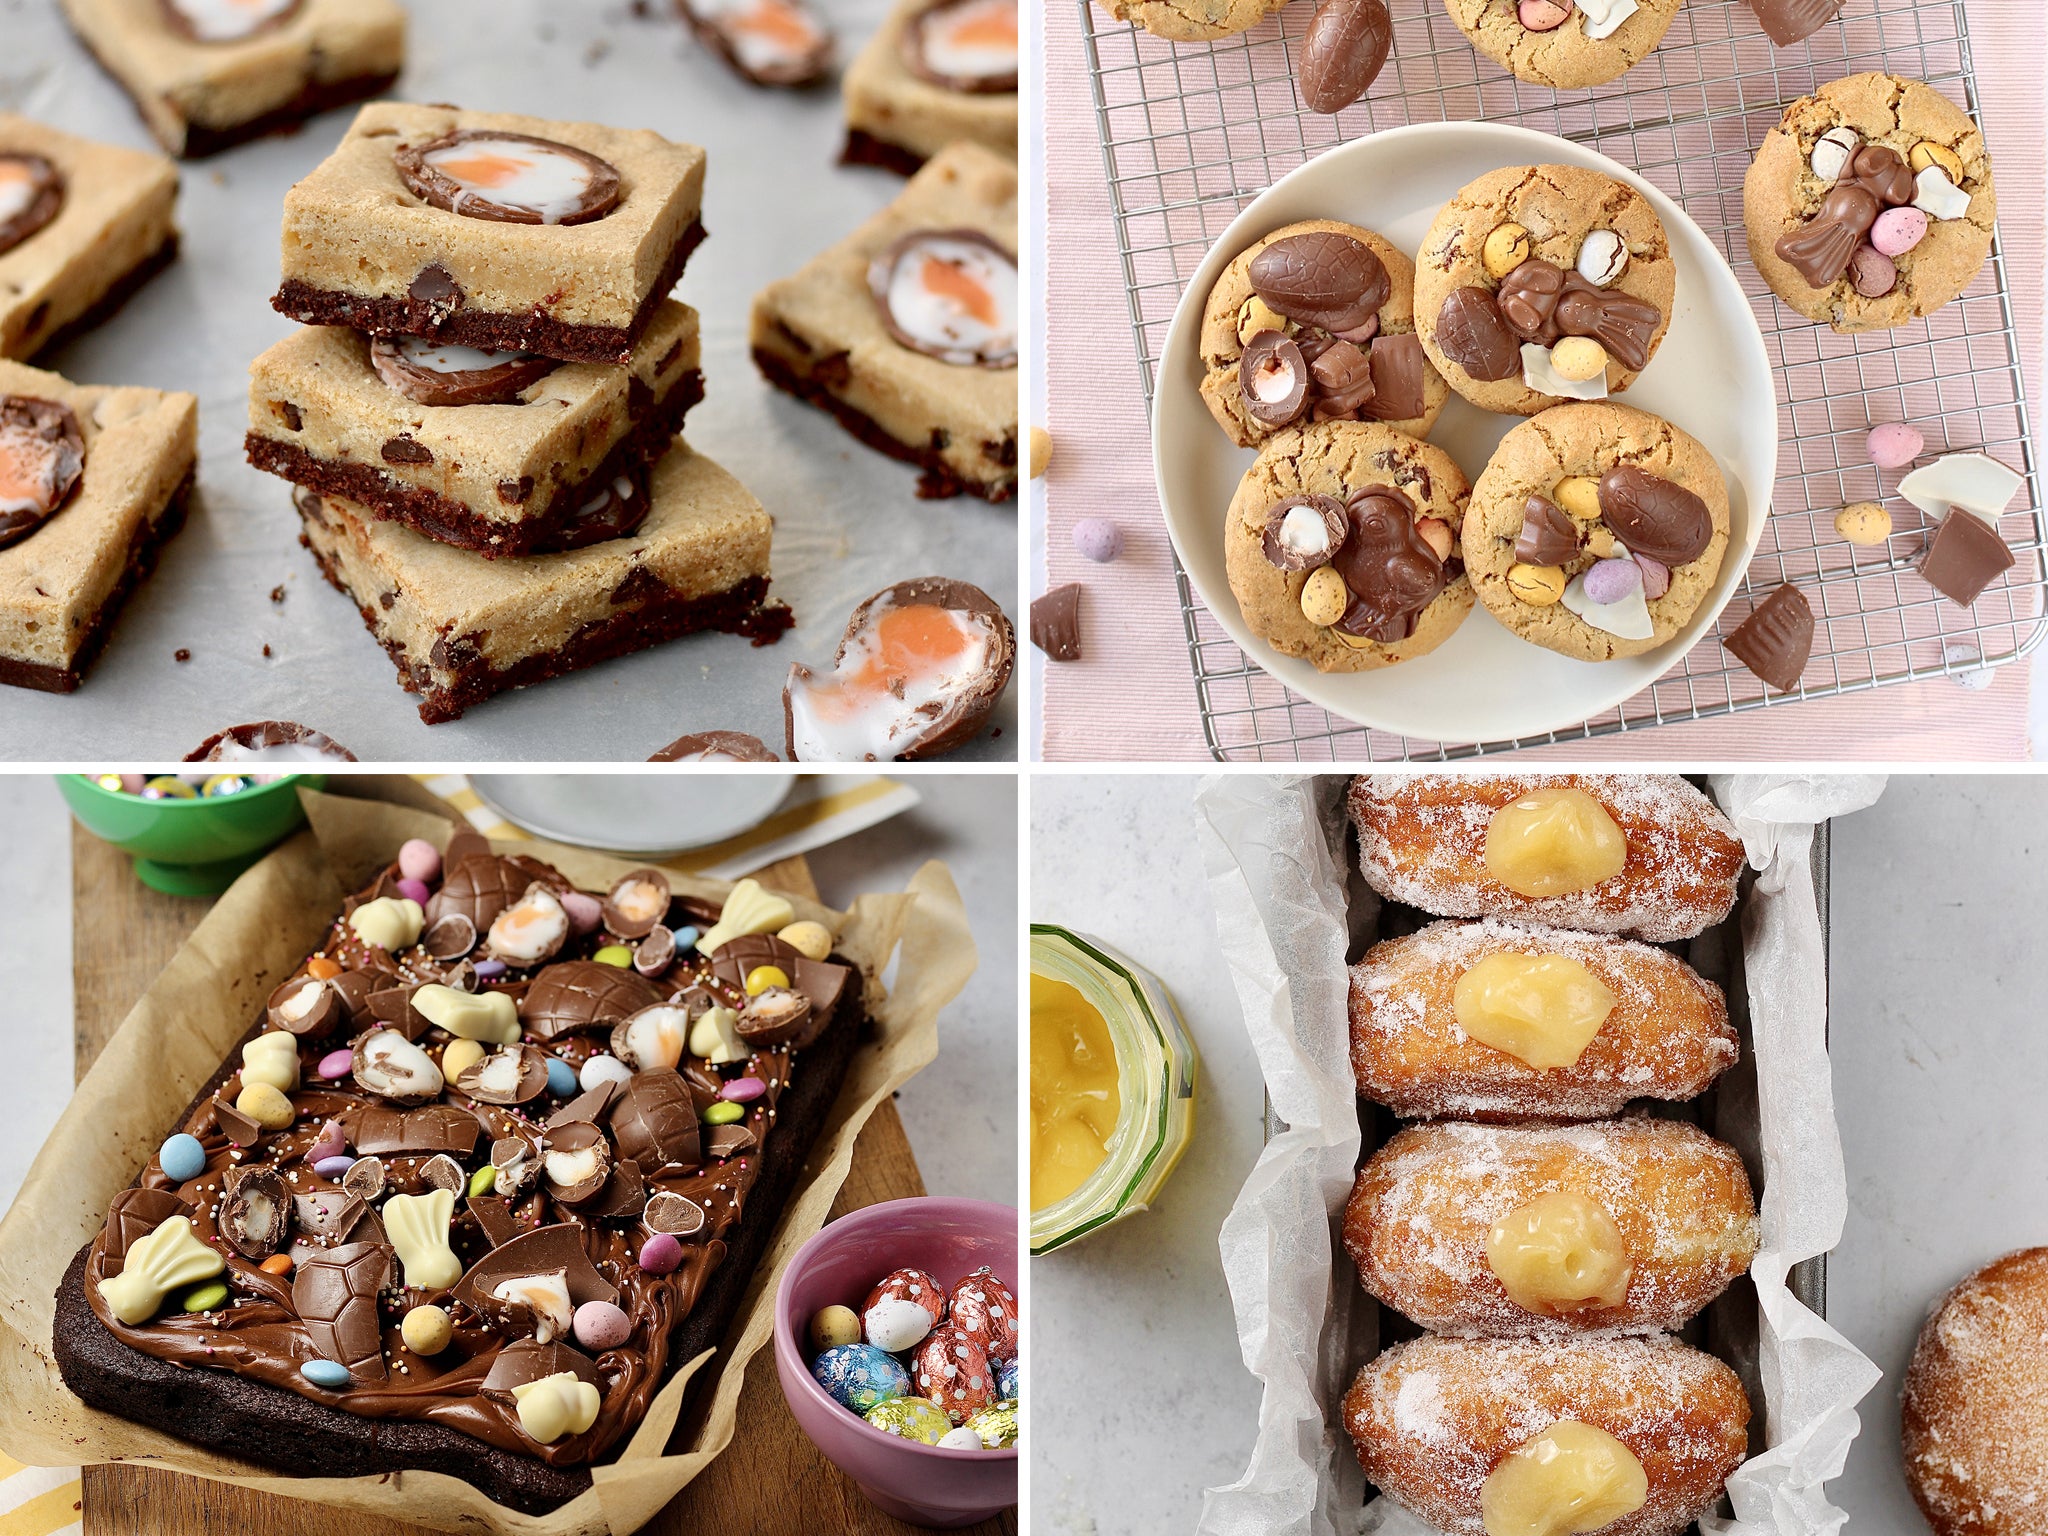 Make Easter indulgence last with these easy baking recipes